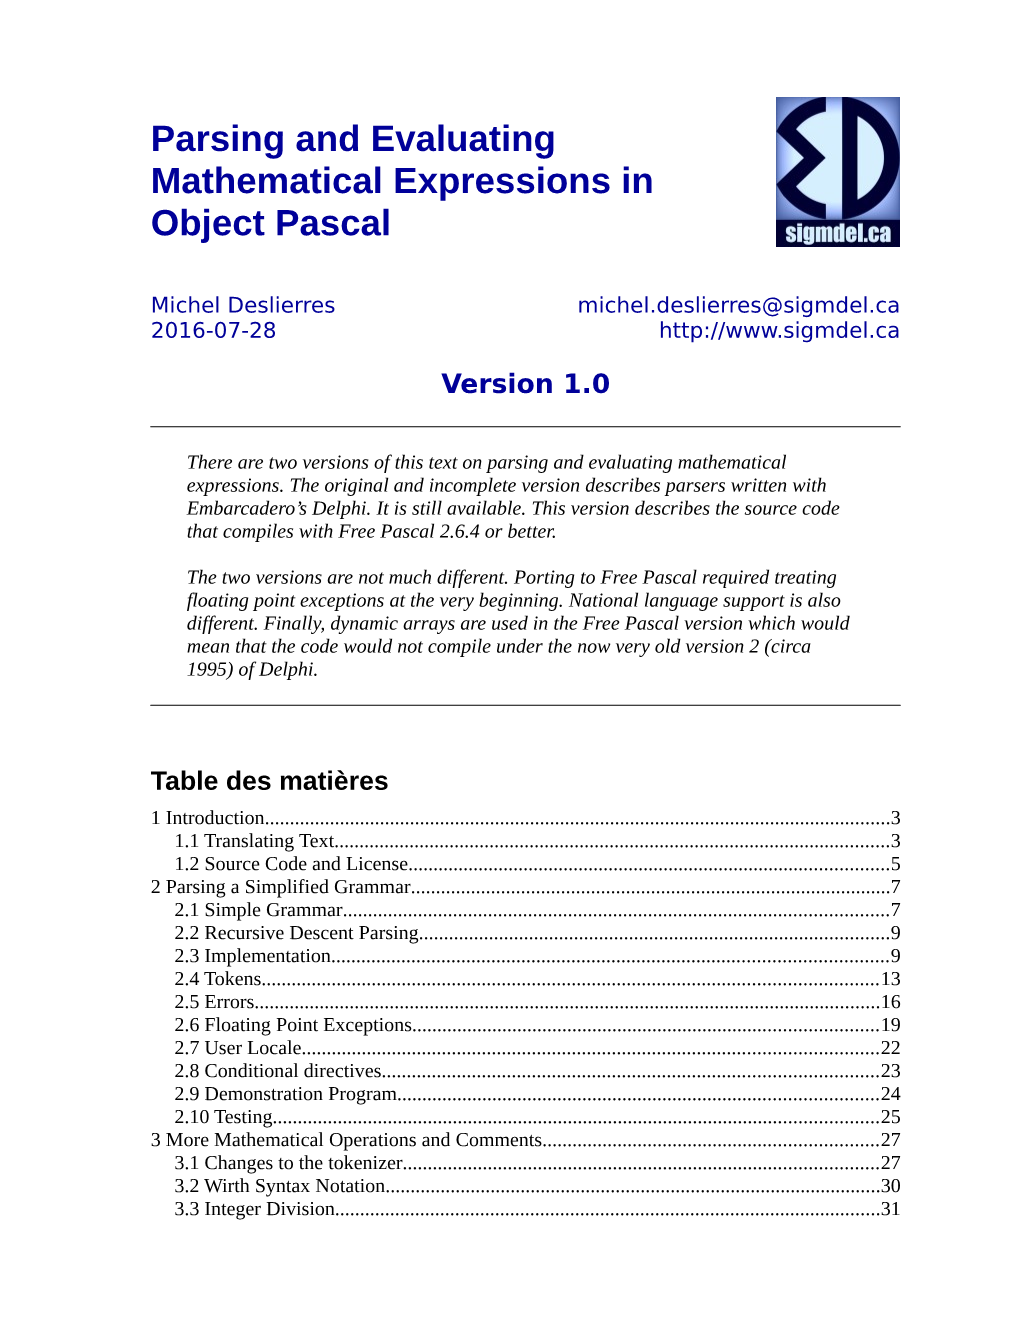 Parsing and Evaluating Mathematical Expressions in Object Pascal